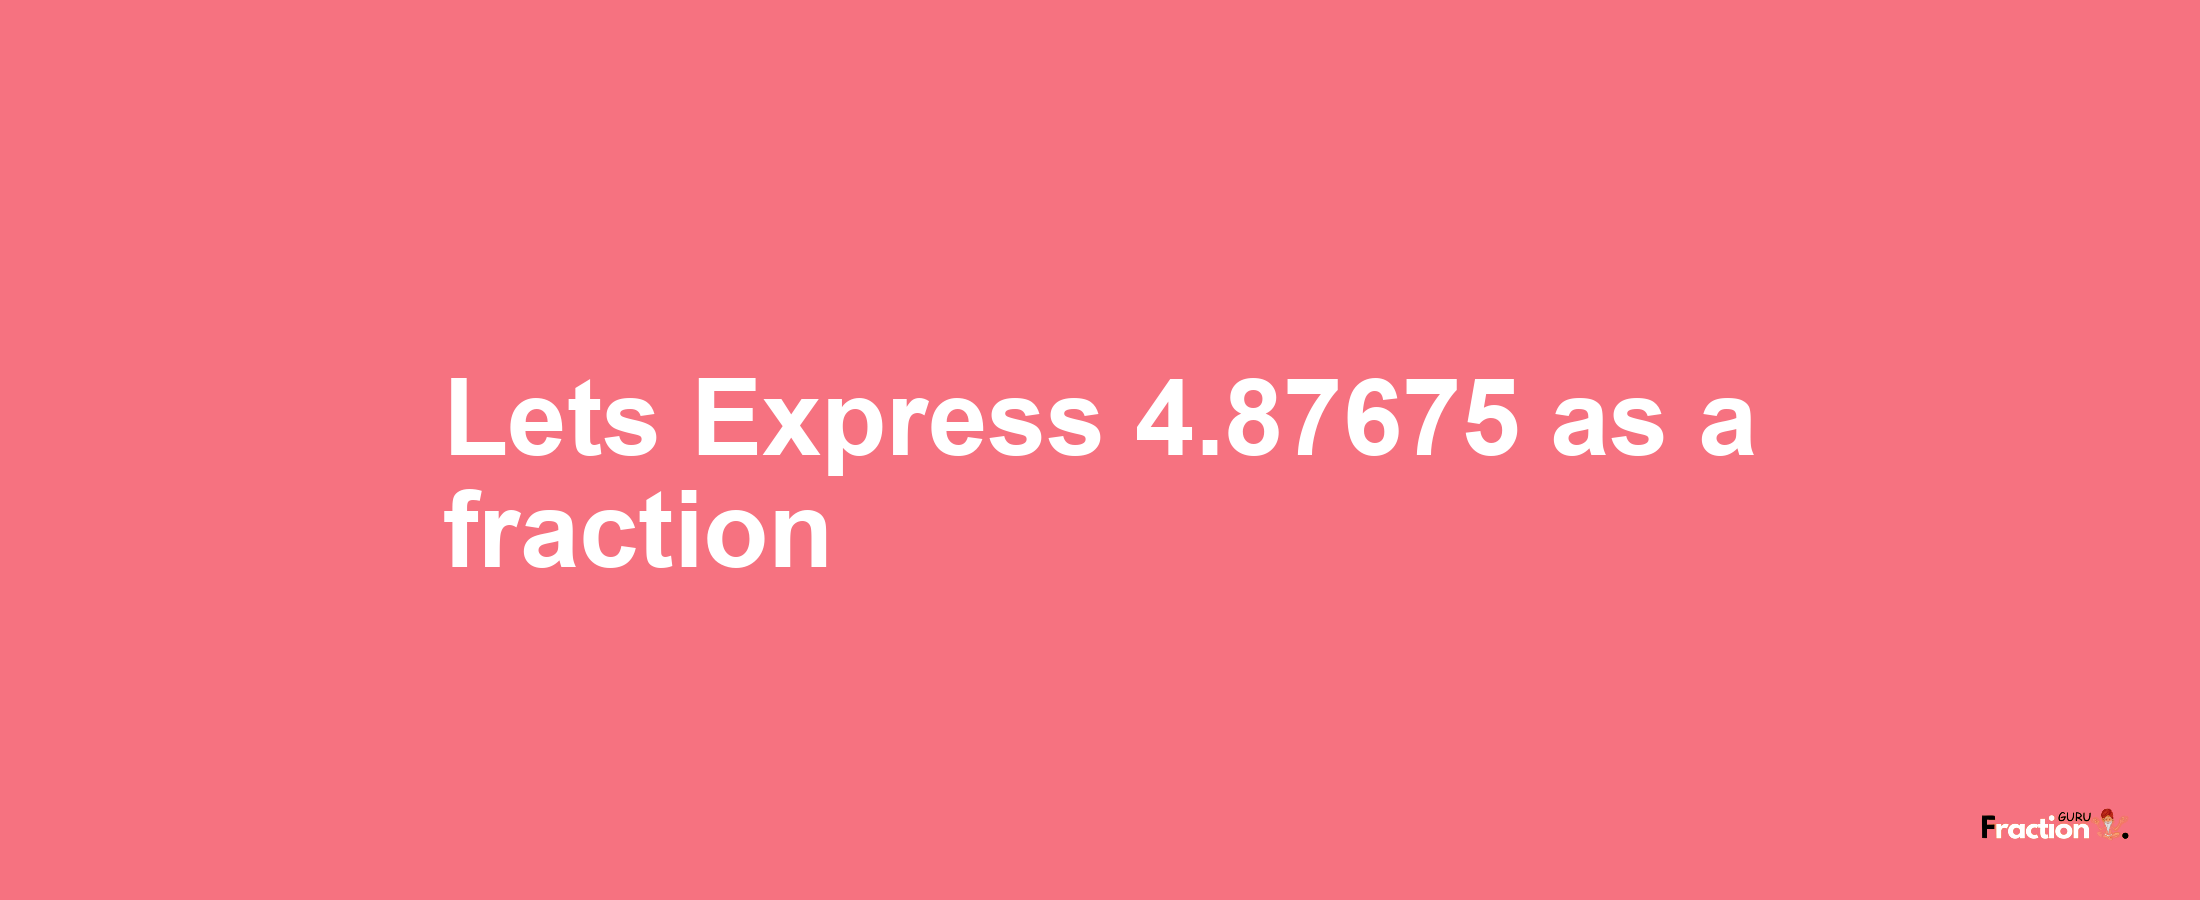 Lets Express 4.87675 as afraction